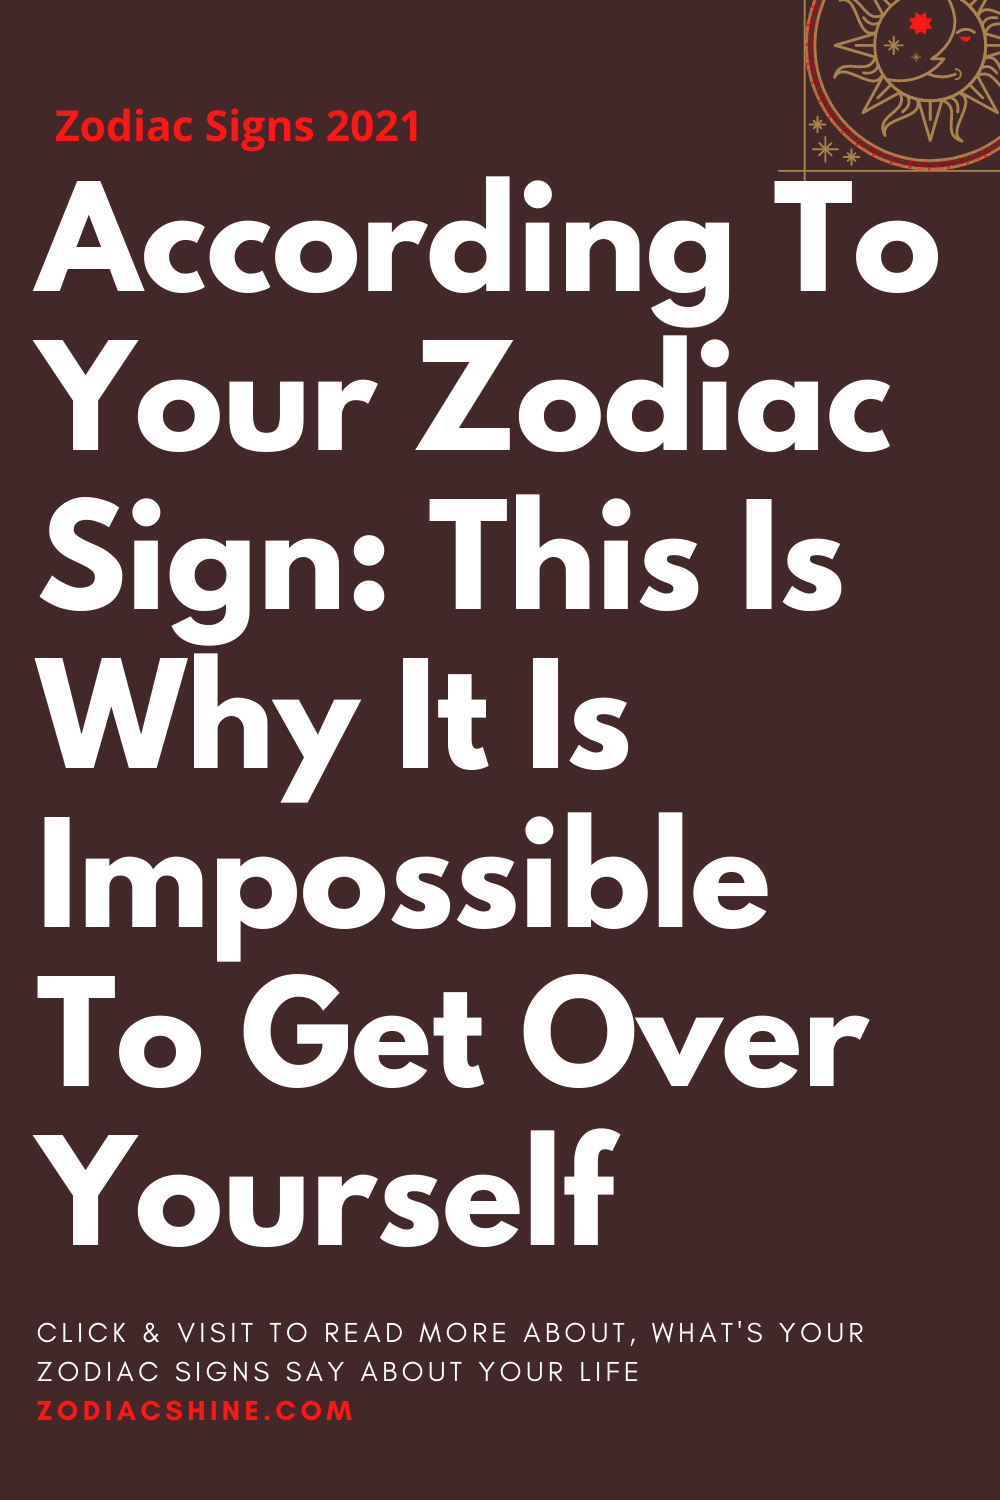 According To Your Zodiac Sign: This Is Why It Is Impossible To Get Over Yourself